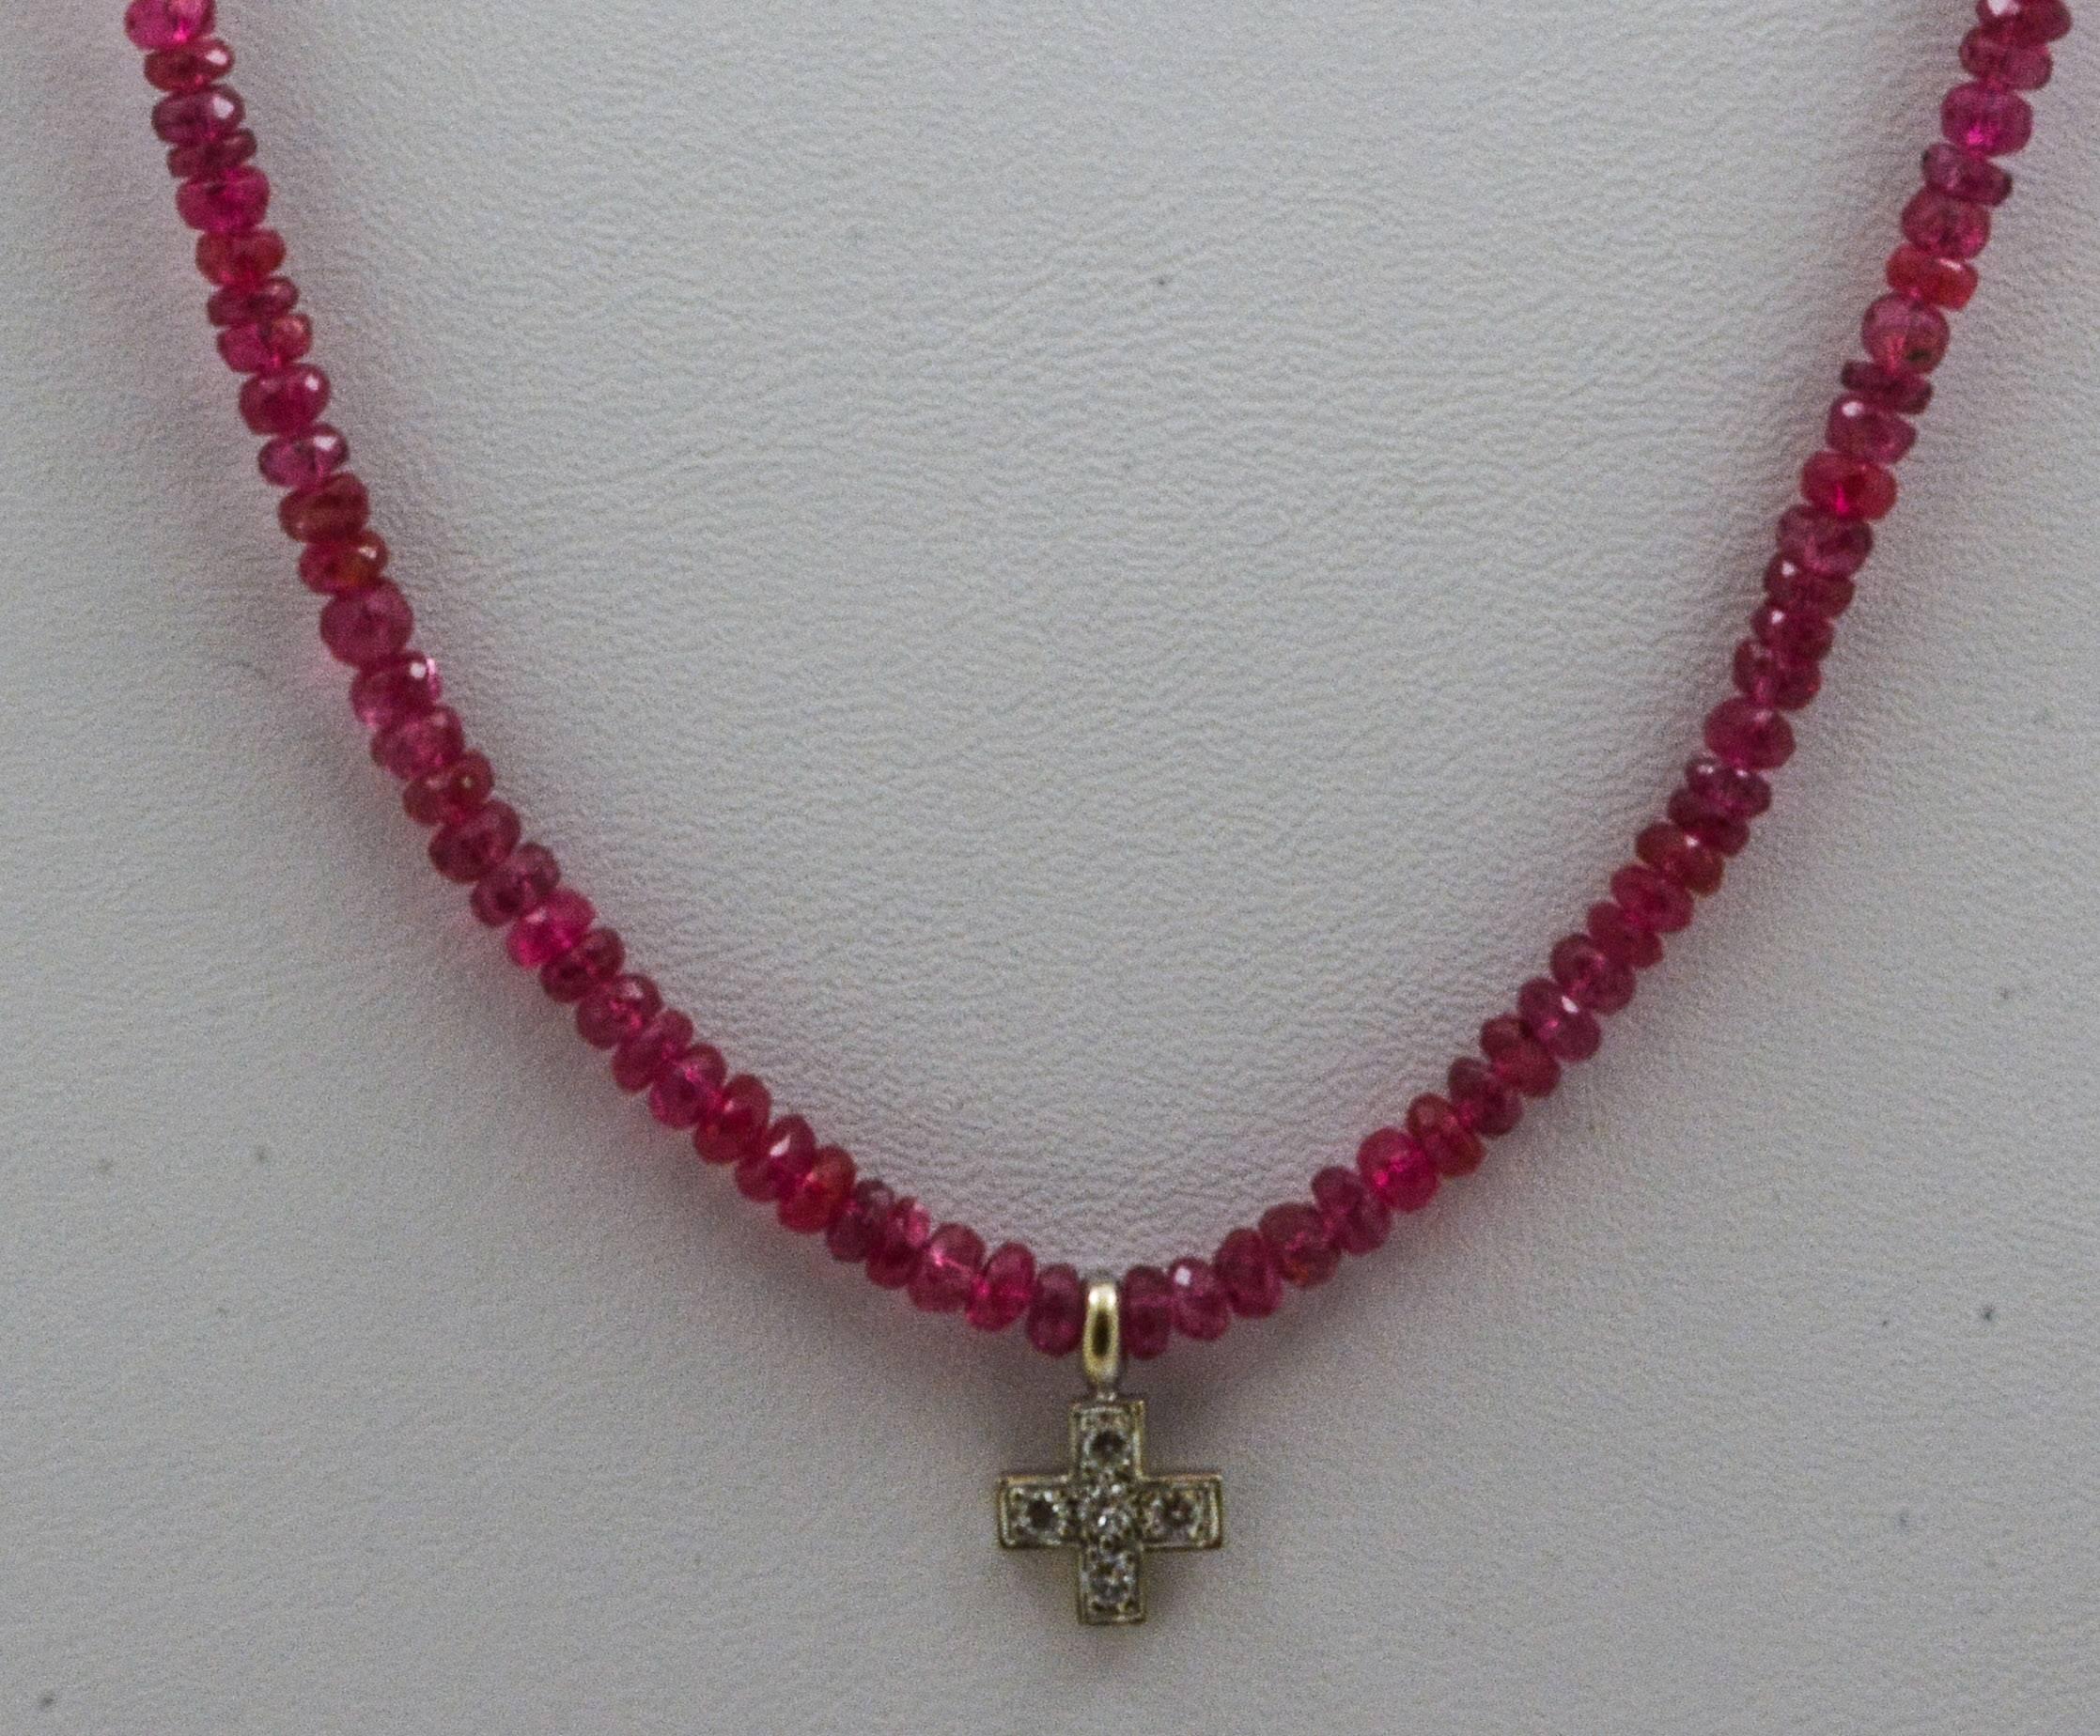 35 carats of lovely pink sapphires are strung on a 16in long strand in this beautiful diamond cross necklace. Each sapphire measures 3.45mm in diameter and is accented by the necklace’s focal point: a sparkling diamond cross set in 14kt white gold.